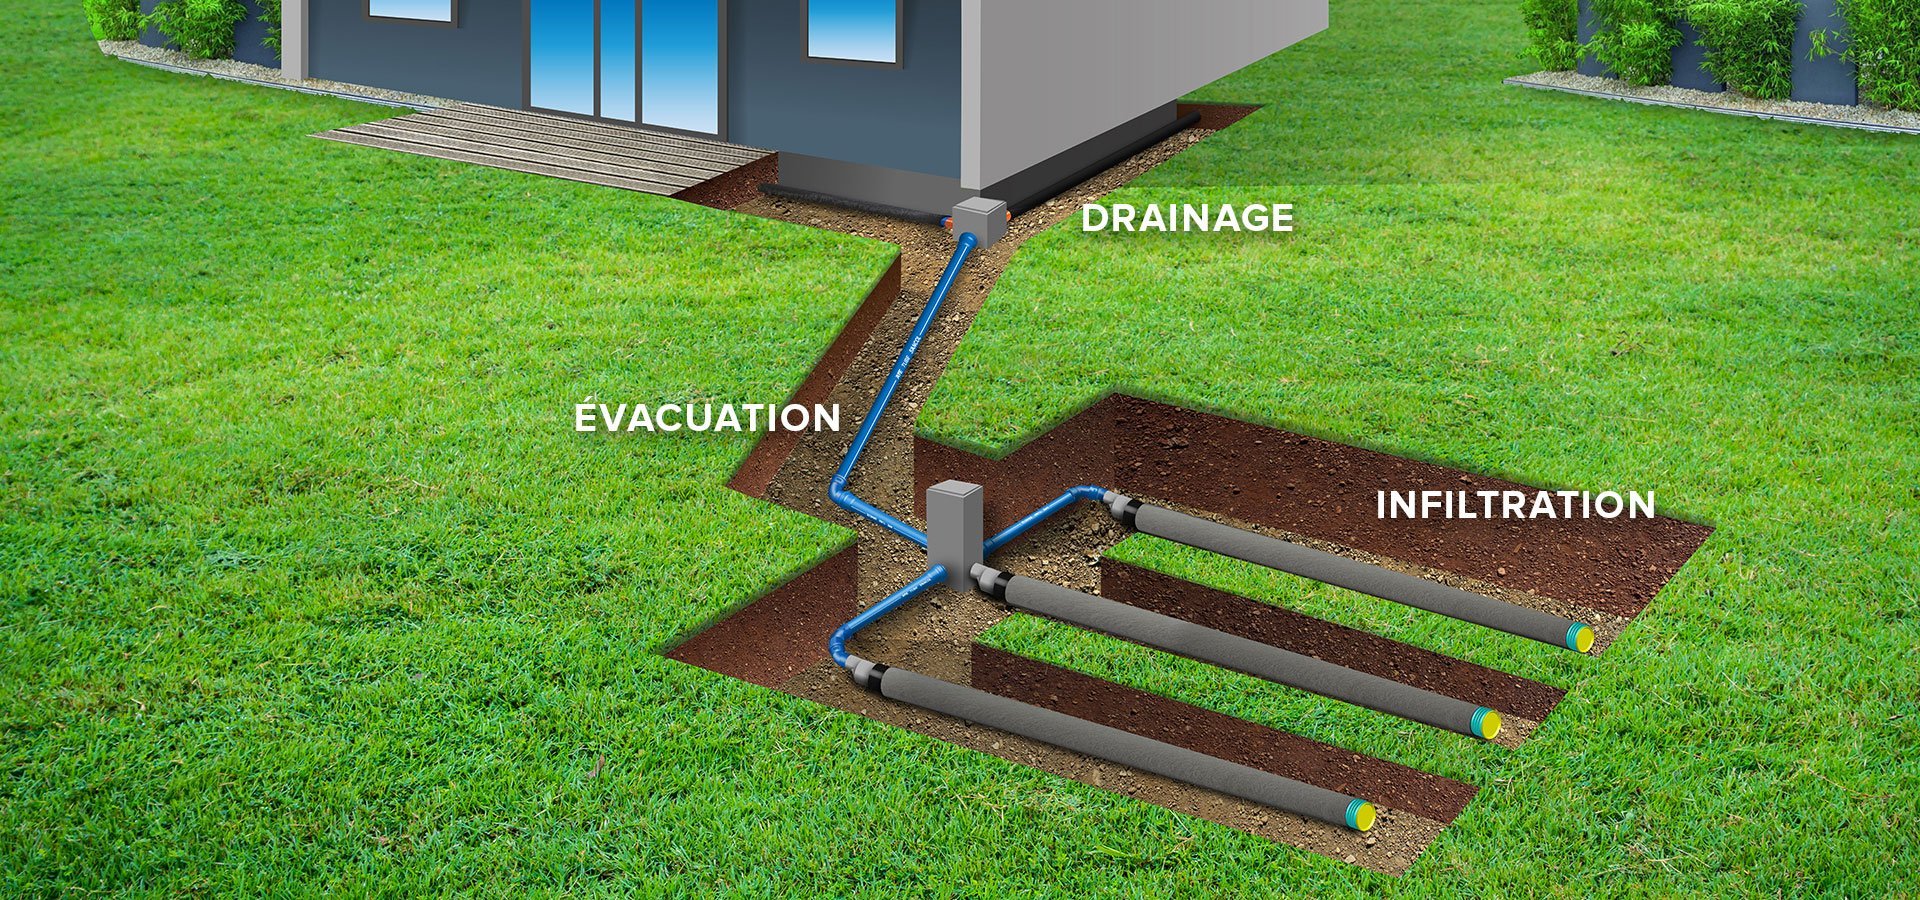 Infiltration Drainage